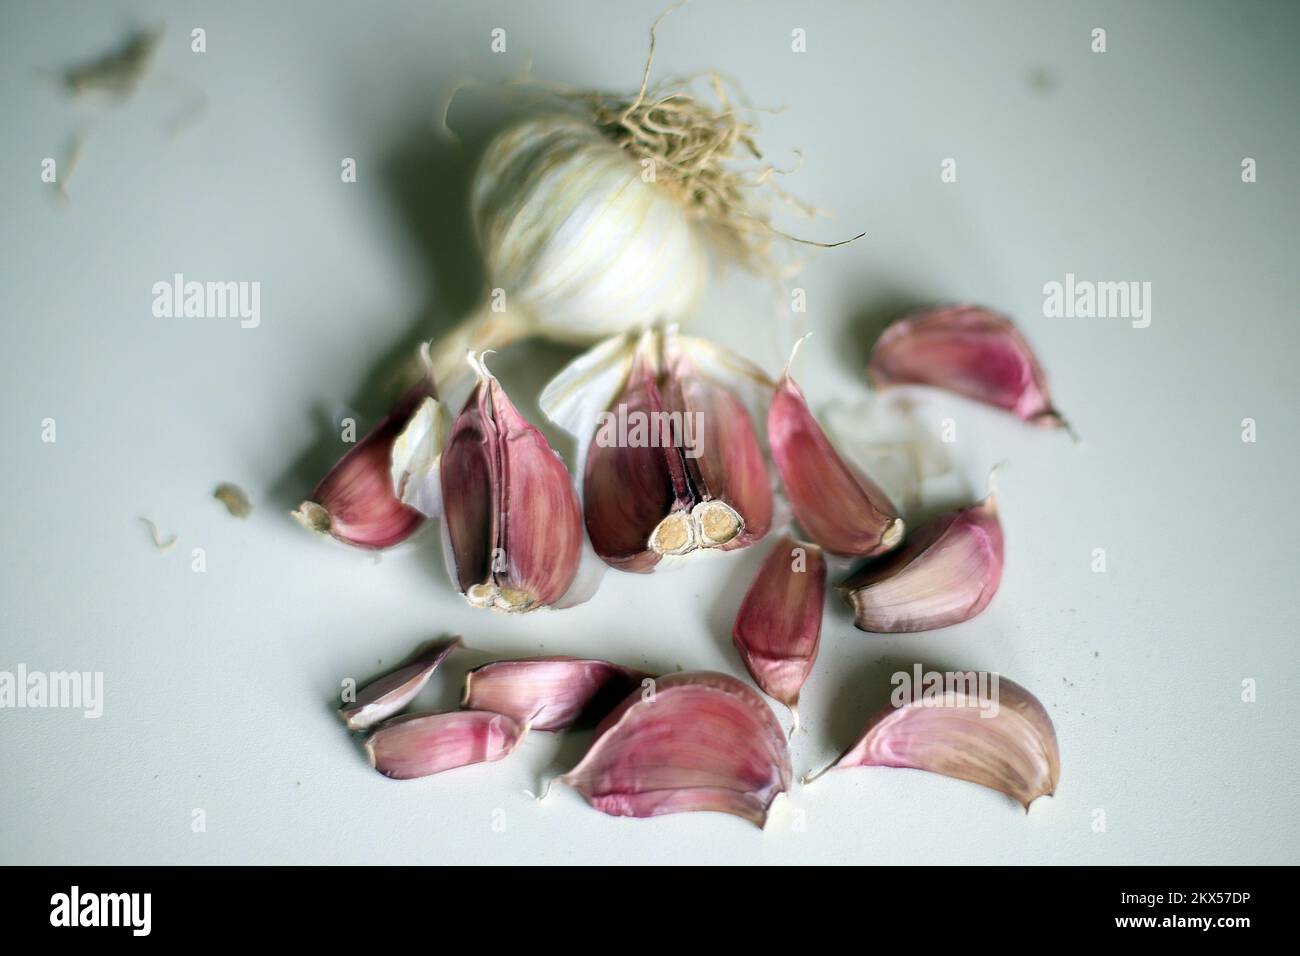 11.03.2018., Zagreb, Croatia - Garlic (Allium sativum) is a species in the onion genus, Allium. Its close relatives include the onion, shallot, leek, chive, and Chinese onion. Garlic is native to Central Asia and northeastern Iran, and has long been a common seasoning worldwide, with a history of several thousand years of human consumption and use. It was known to ancient Egyptians, and has been used both as a food flavoring and as a traditional medicine. Photo: Goran Stanzl/PIXSELL  Stock Photo